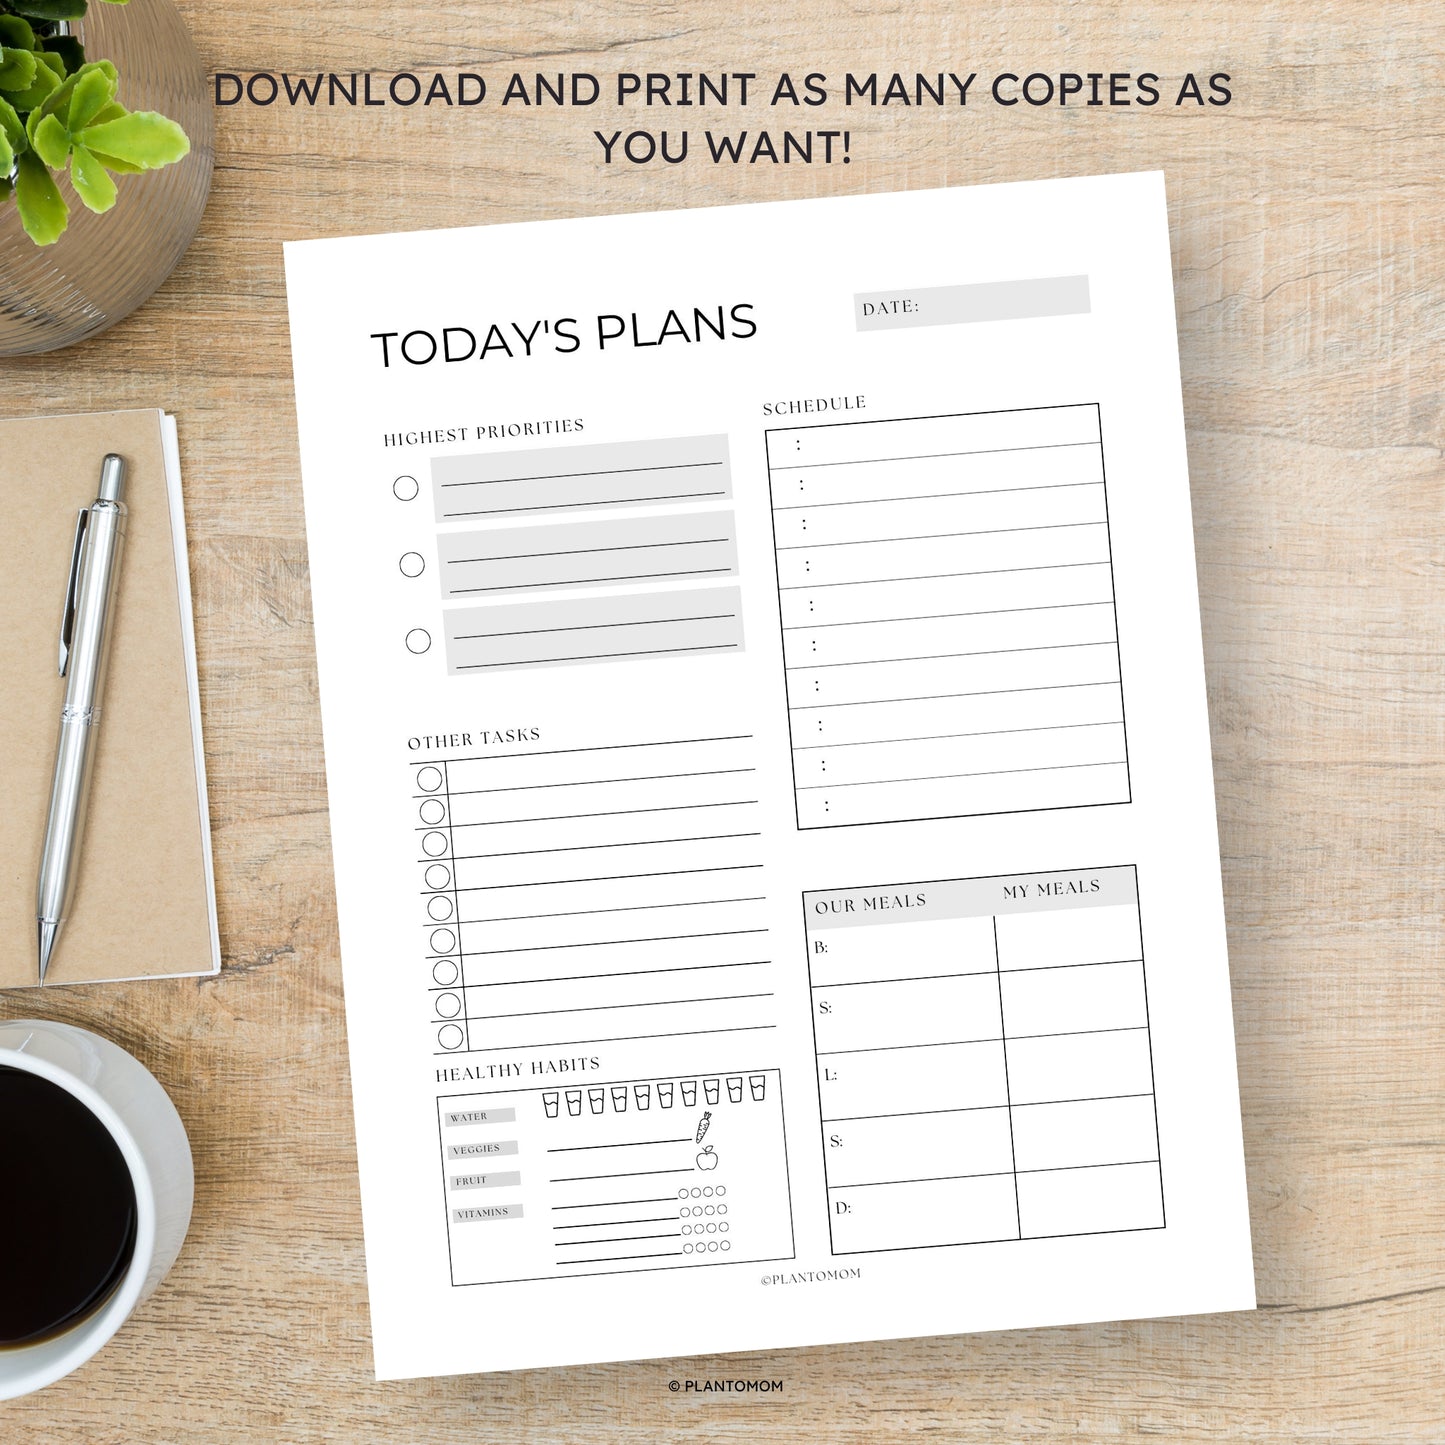 Today's Plans Layout #1C - Printable Daily Planner PDF